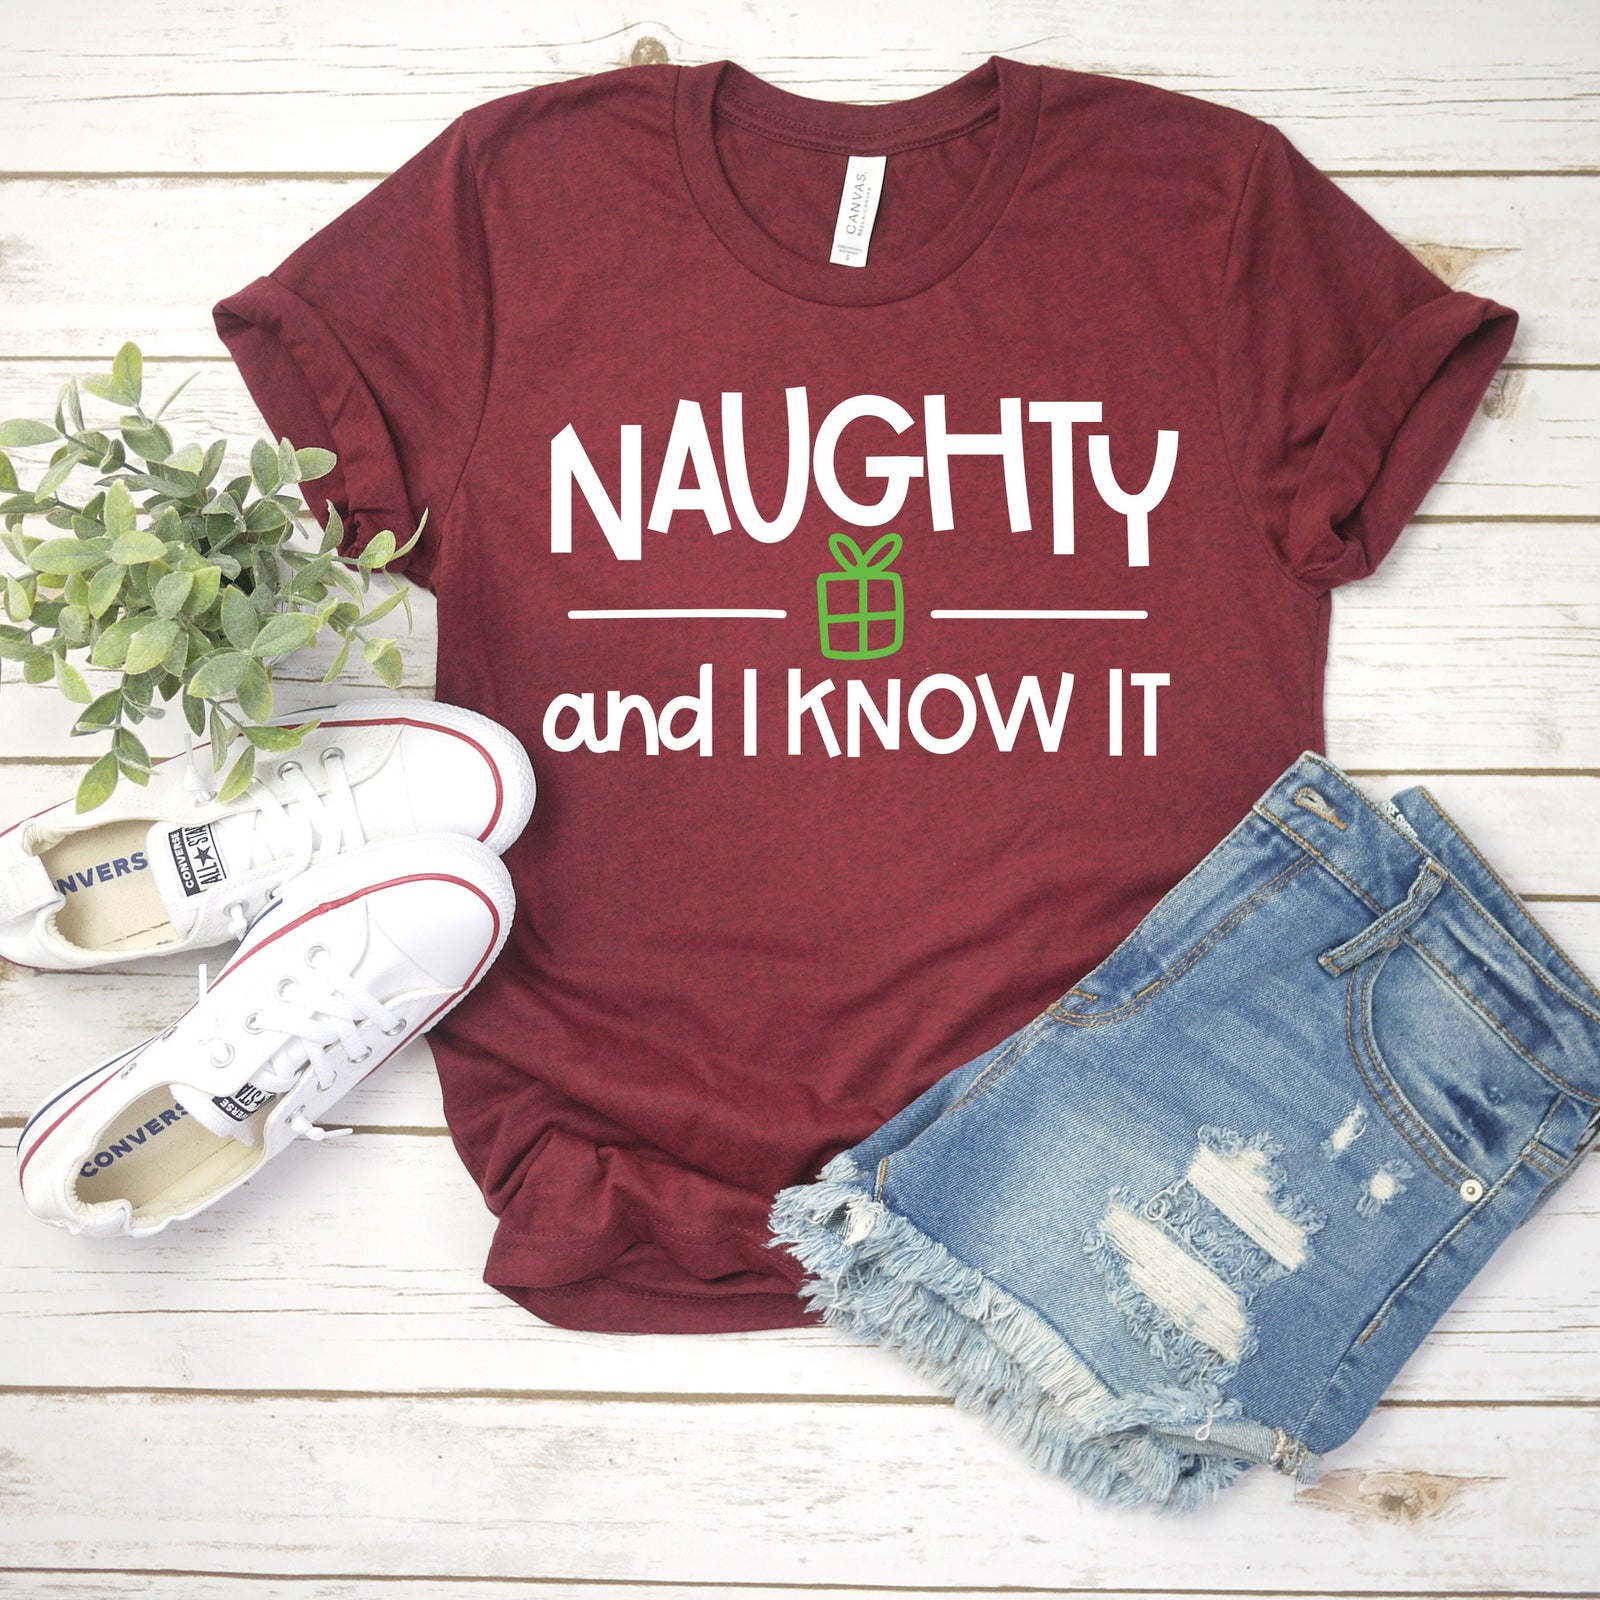 Naughty and I know it Christmas T Shirt - Funny X-Mas T Shirt - Naughty & Nice Shirt Gift